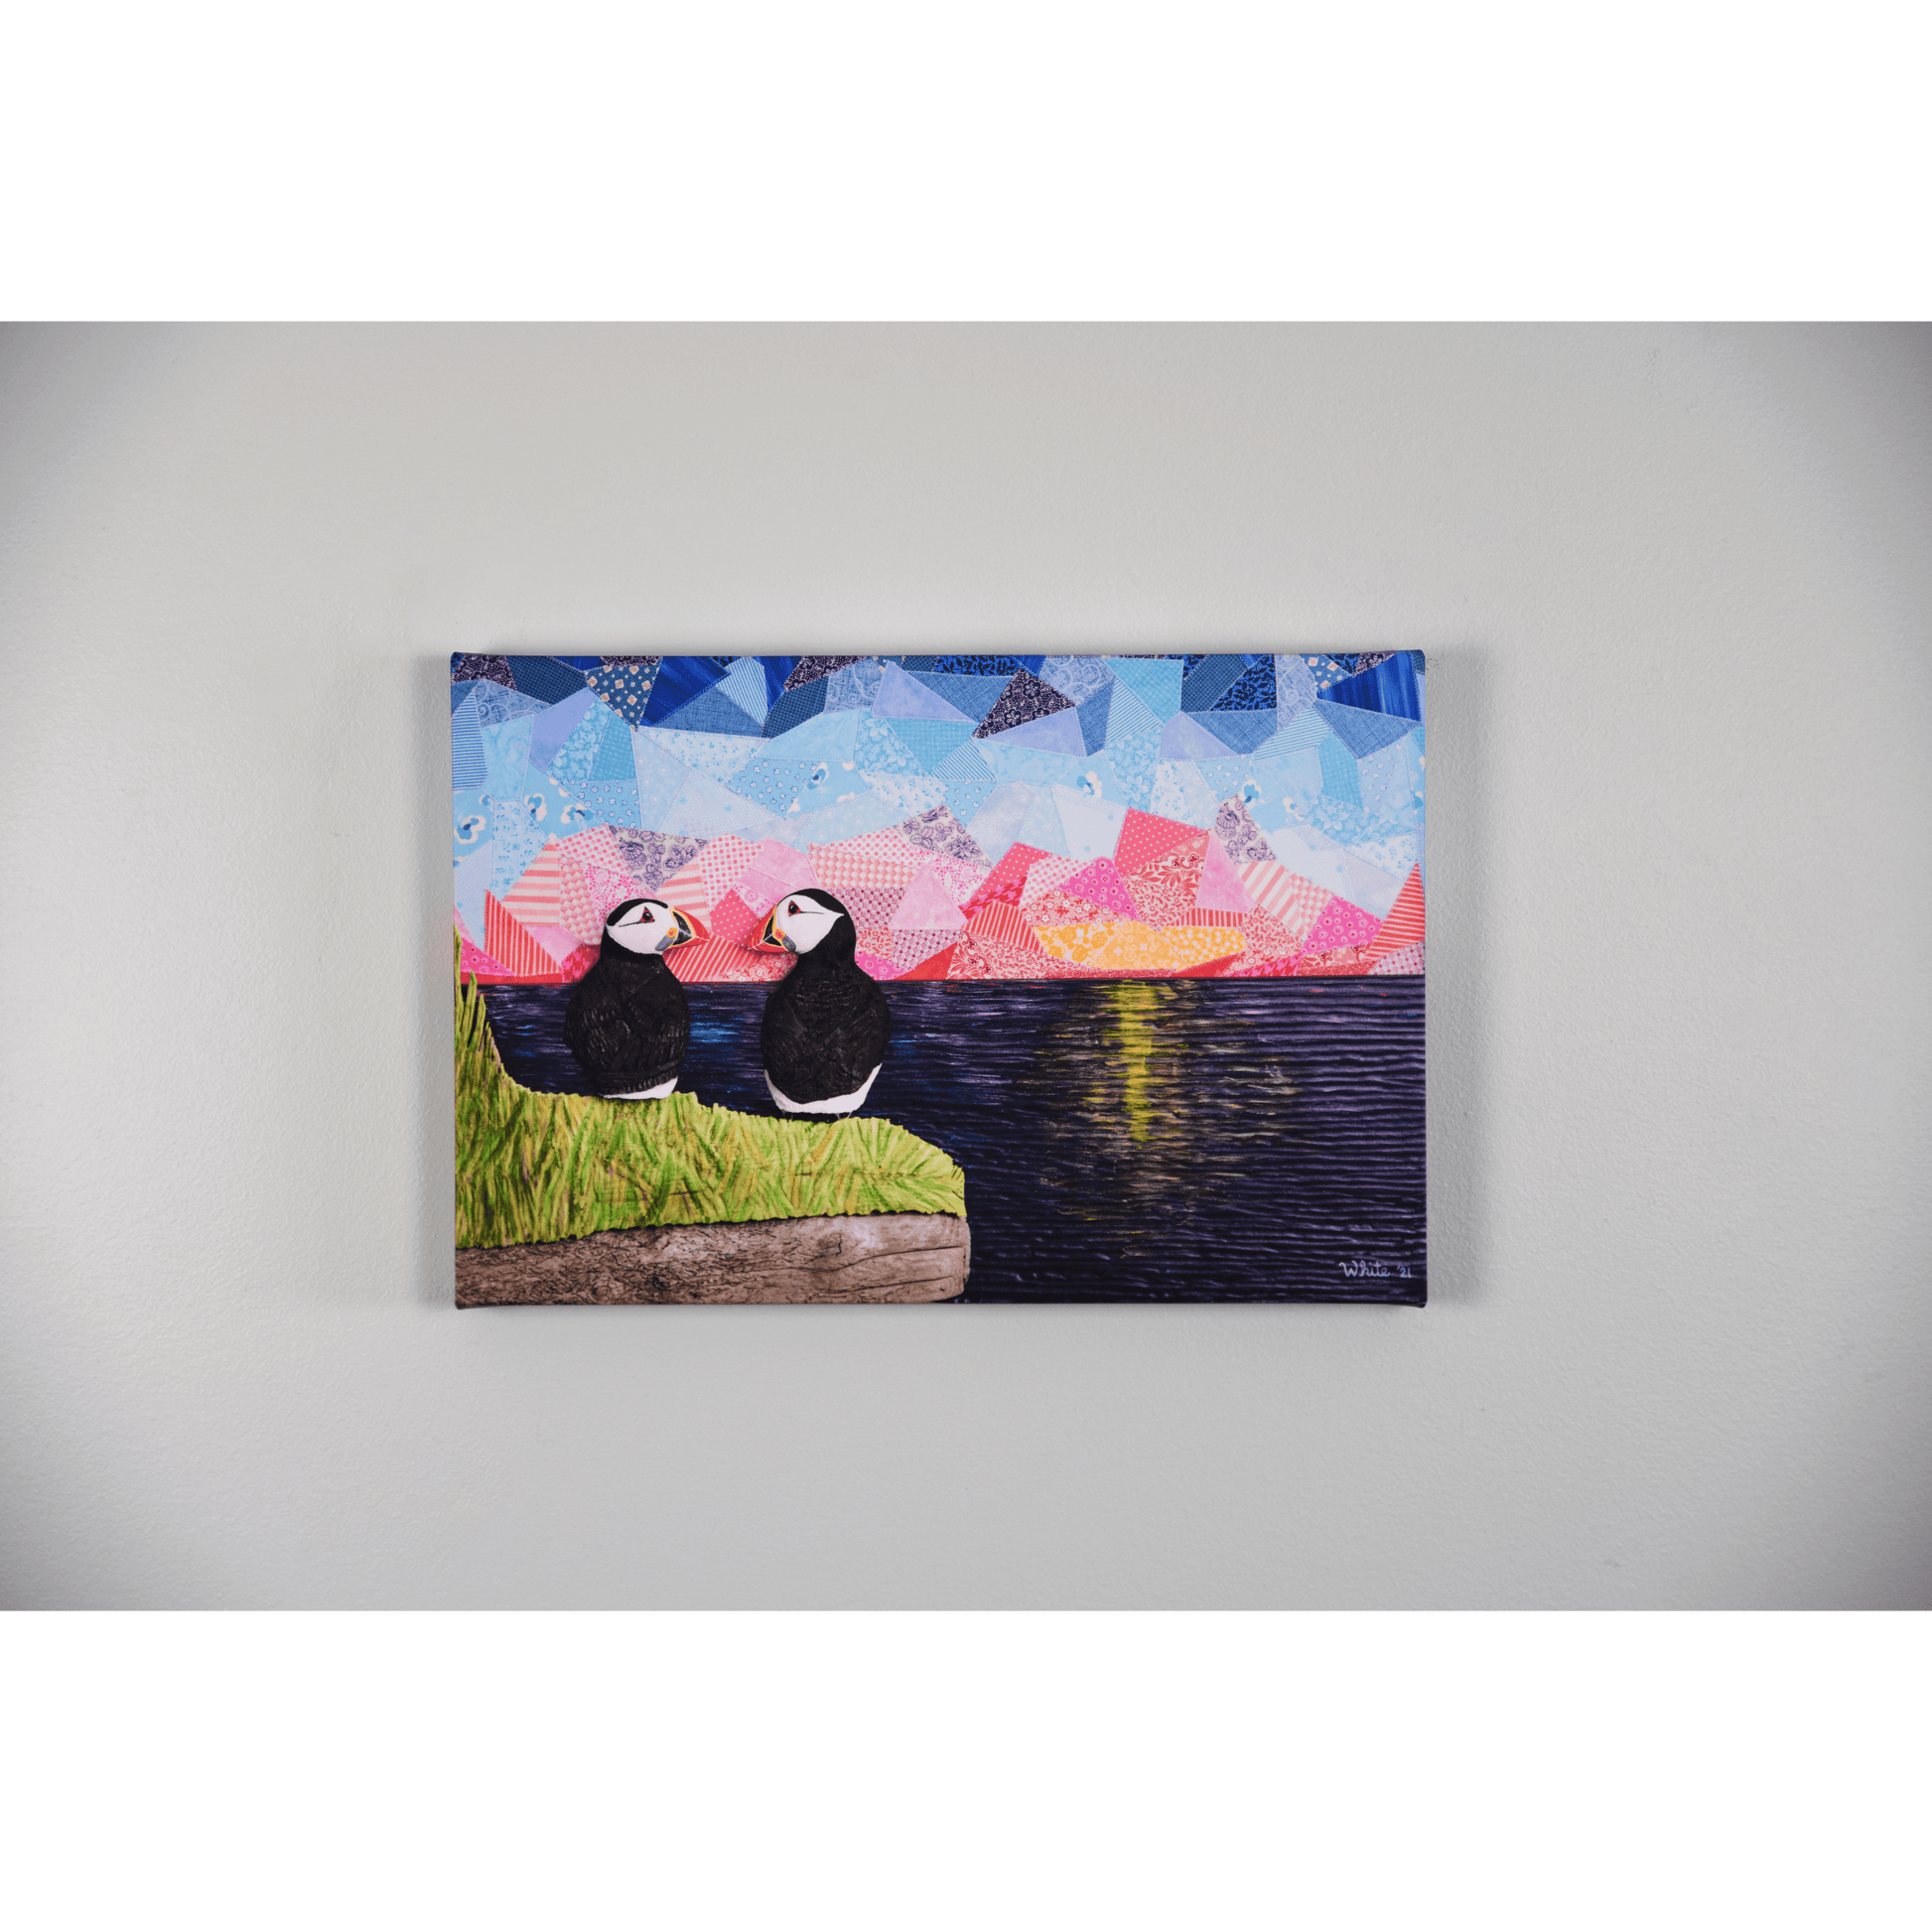 "The Perfect View" reproduction canvas showcases two puffins perched on a coastal rock, gazing lovingly at each other while enjoying a sunset over the ocean.